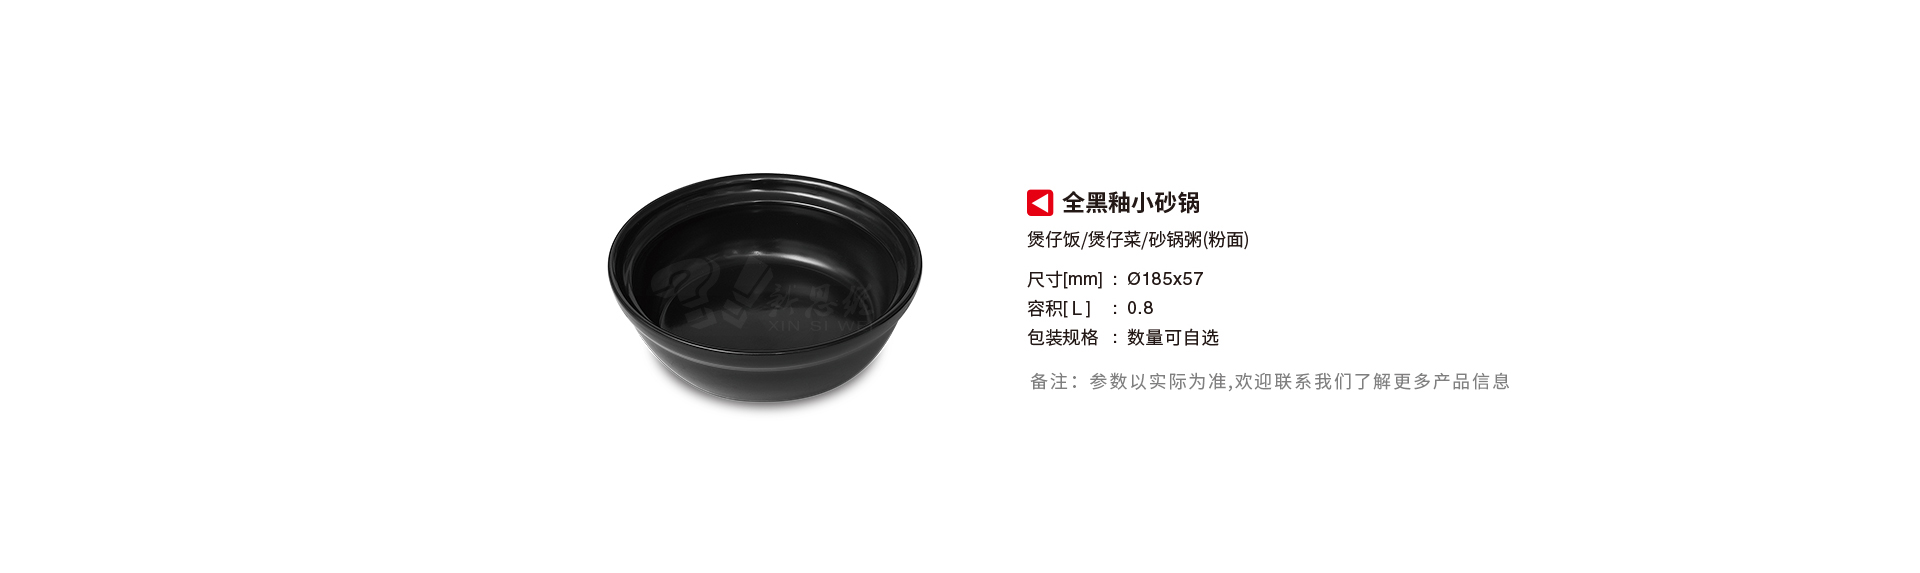 xinsiwei_supporing_materials_black_pottery_clay_pot_small_2_product_parameters.jpg